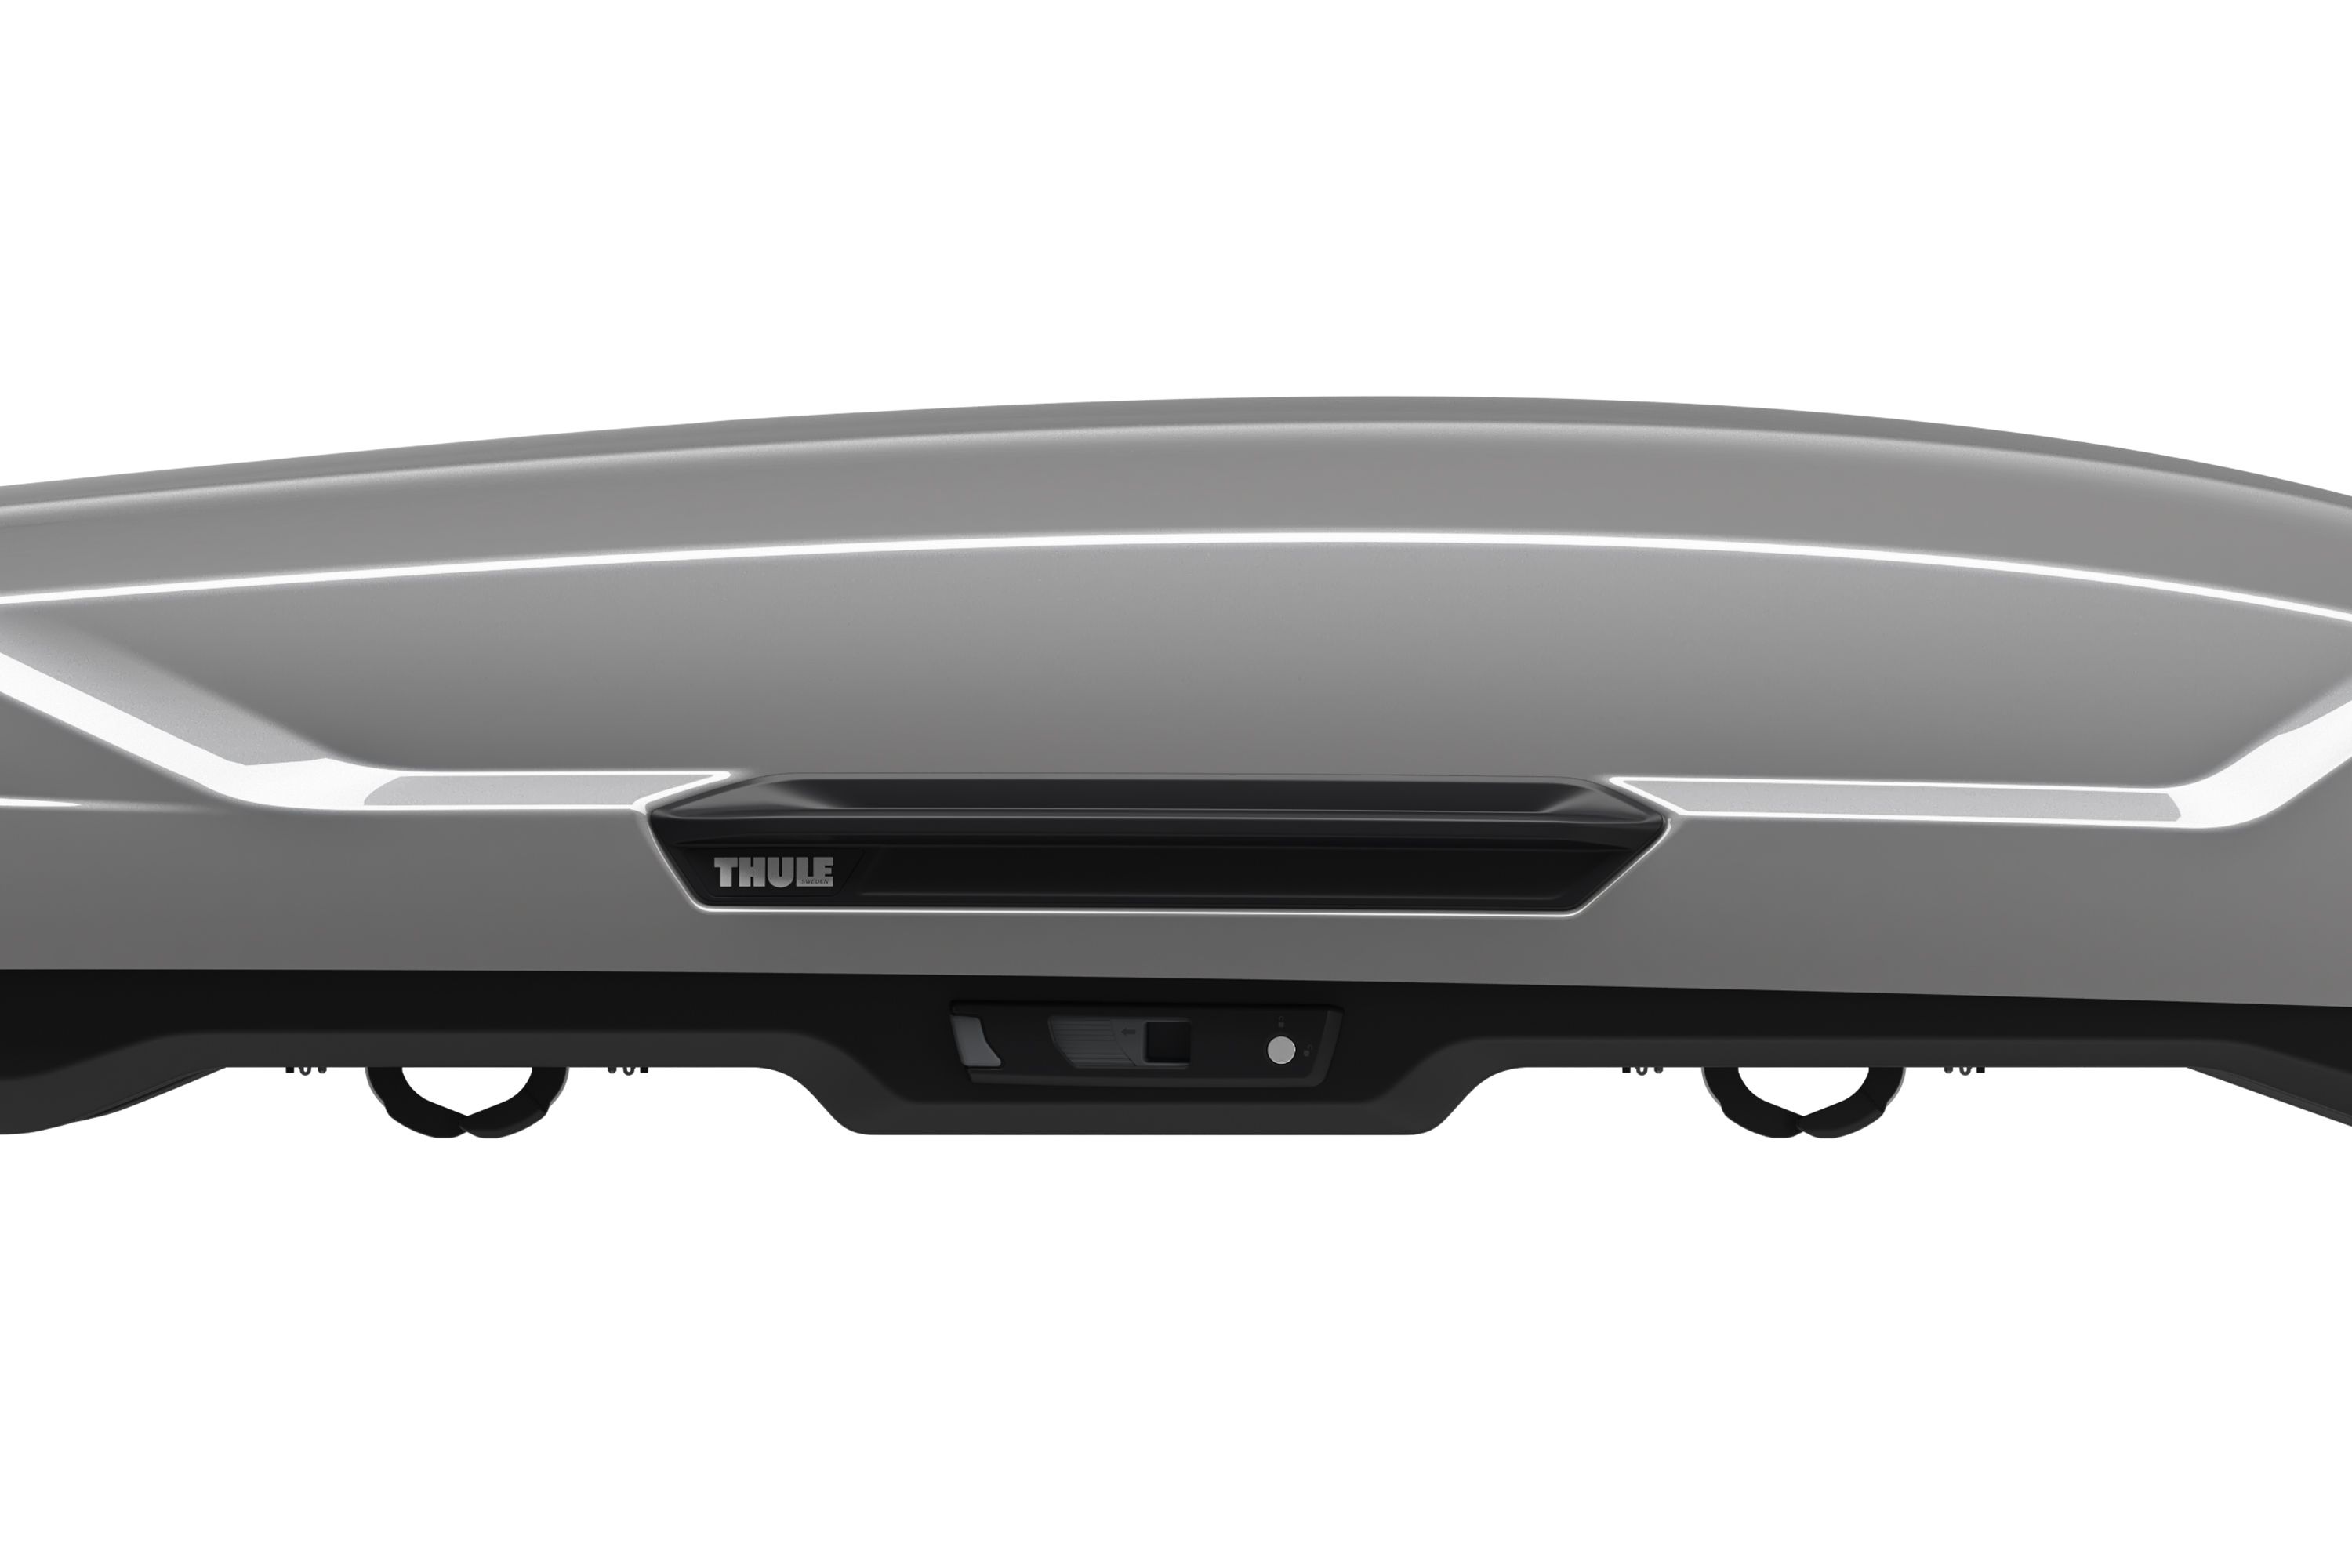 Thule Motion 3 feature